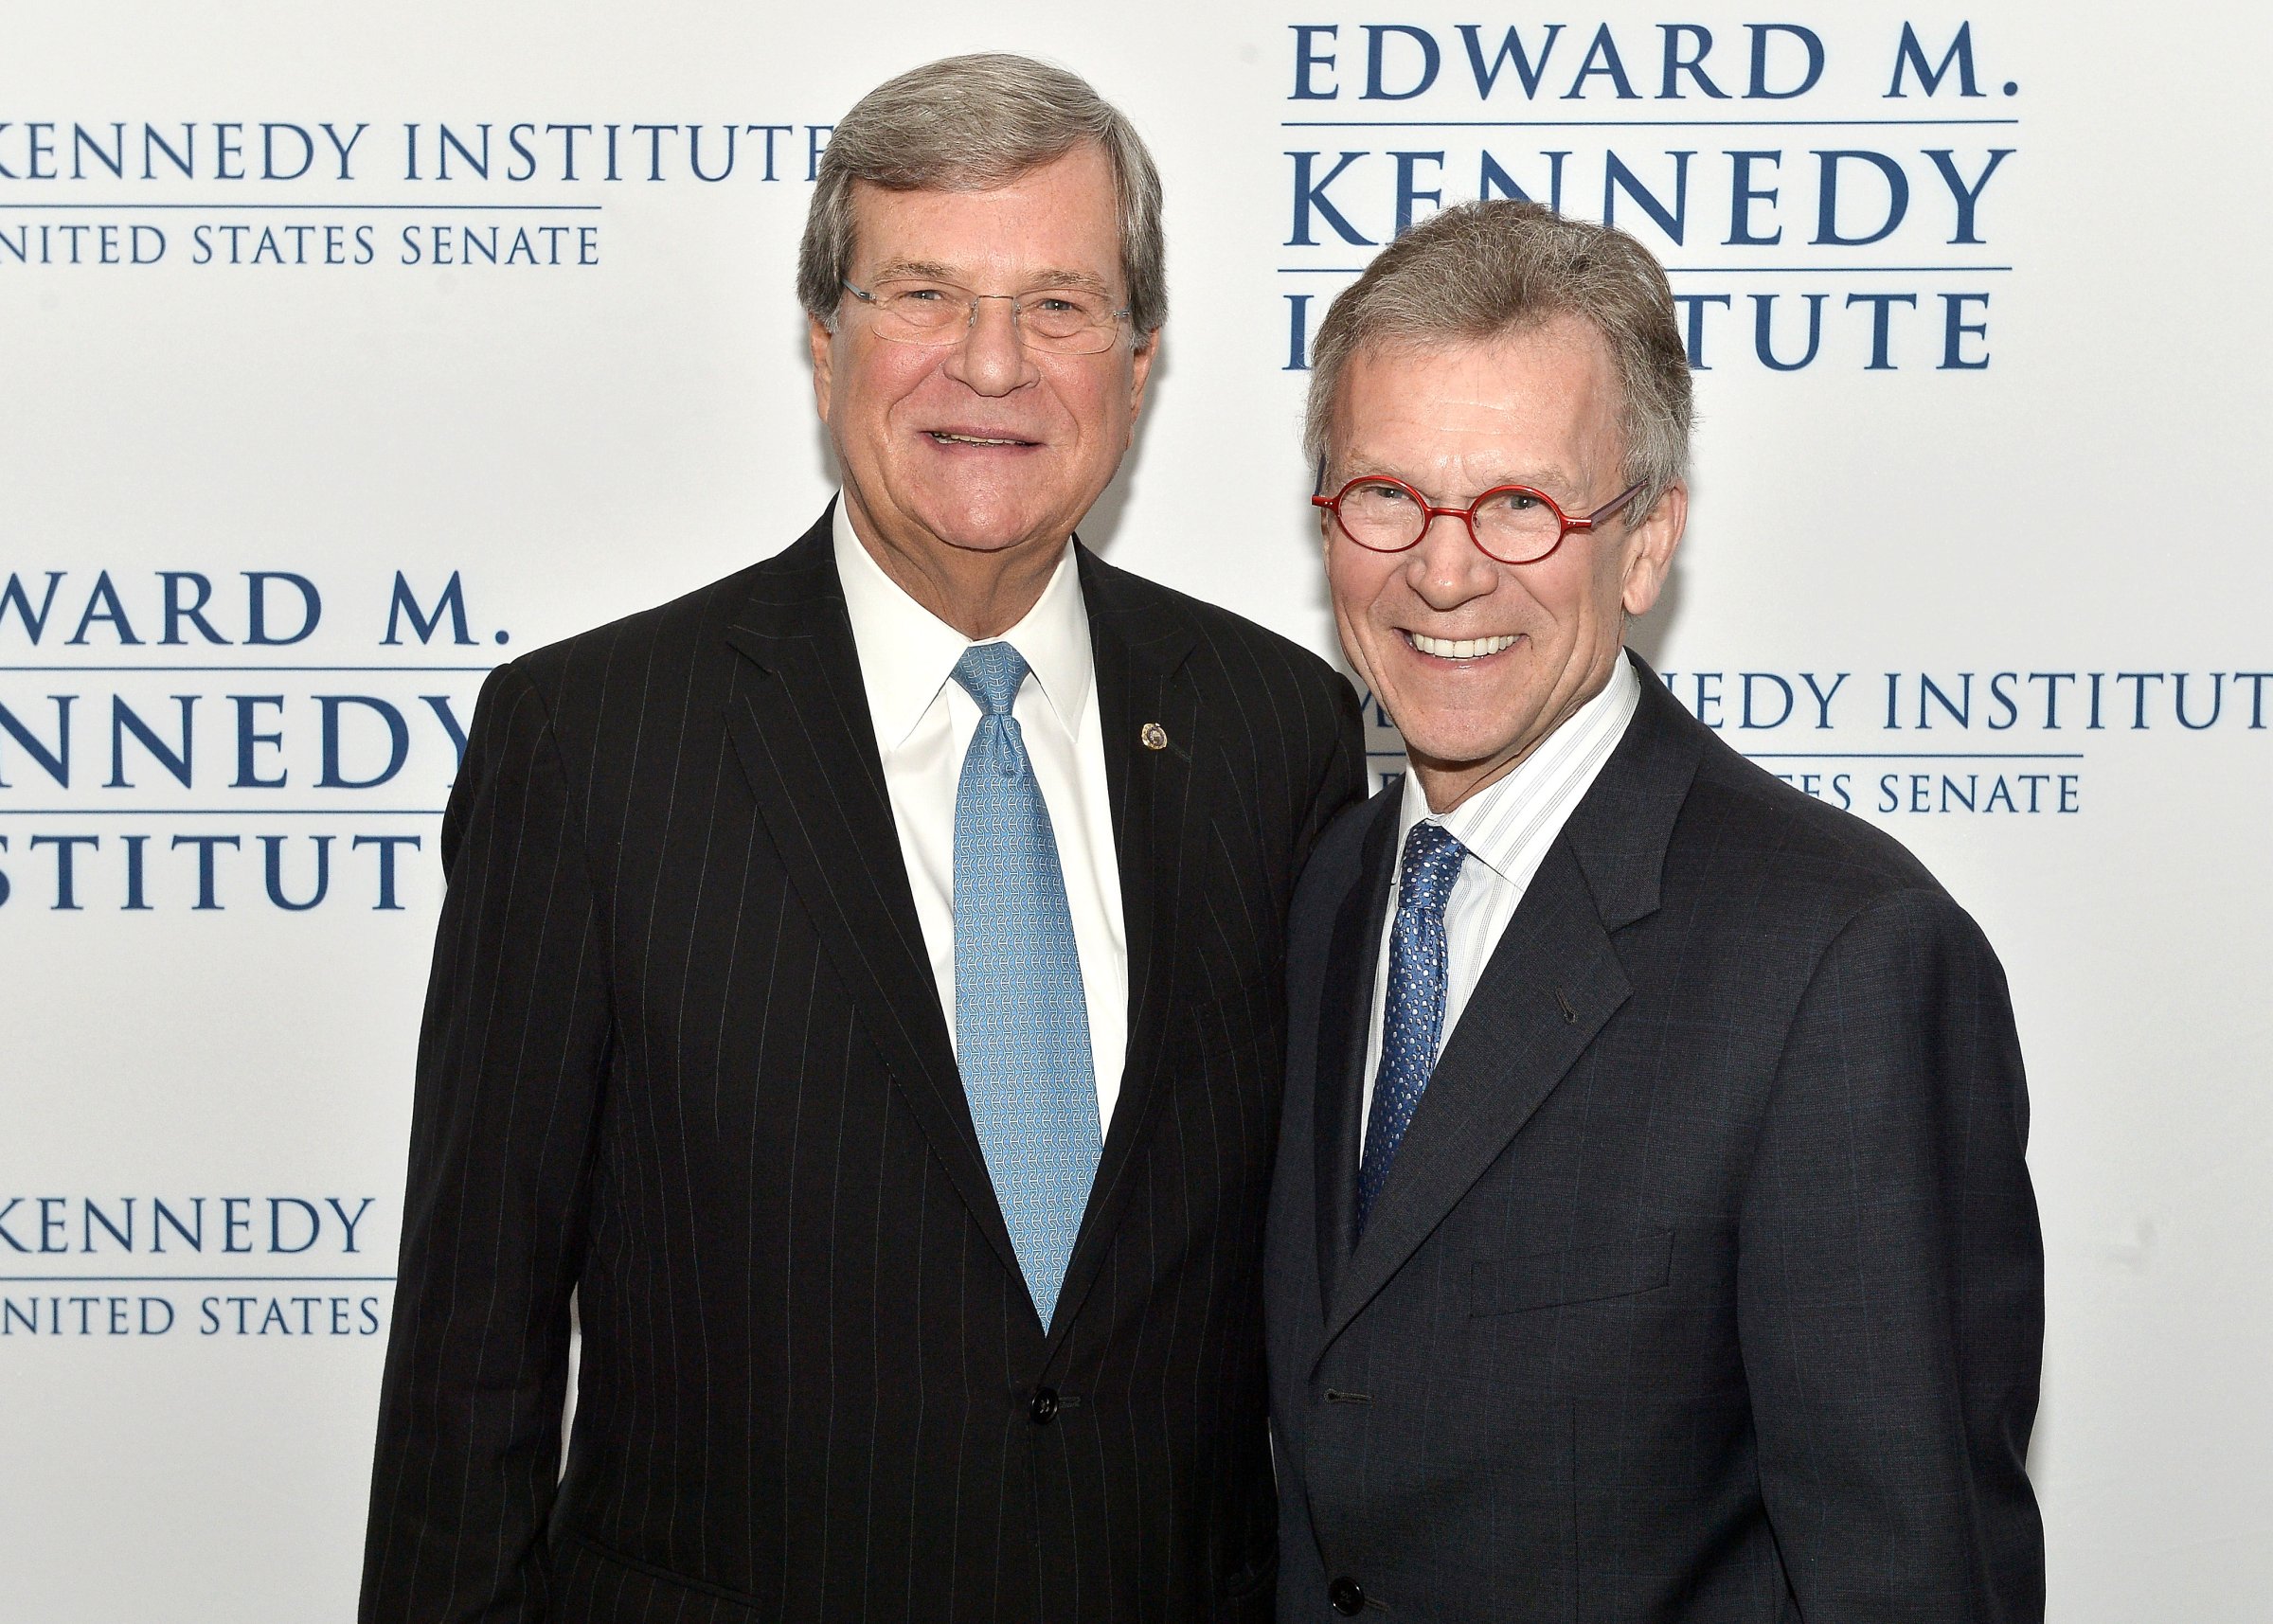 Senators Trent Lott and Tom Daschle attend the Edward M. Kennedy Institute for the U.S. Senate Opening Night Gala and Dedication in Boston on March 29, 2015.